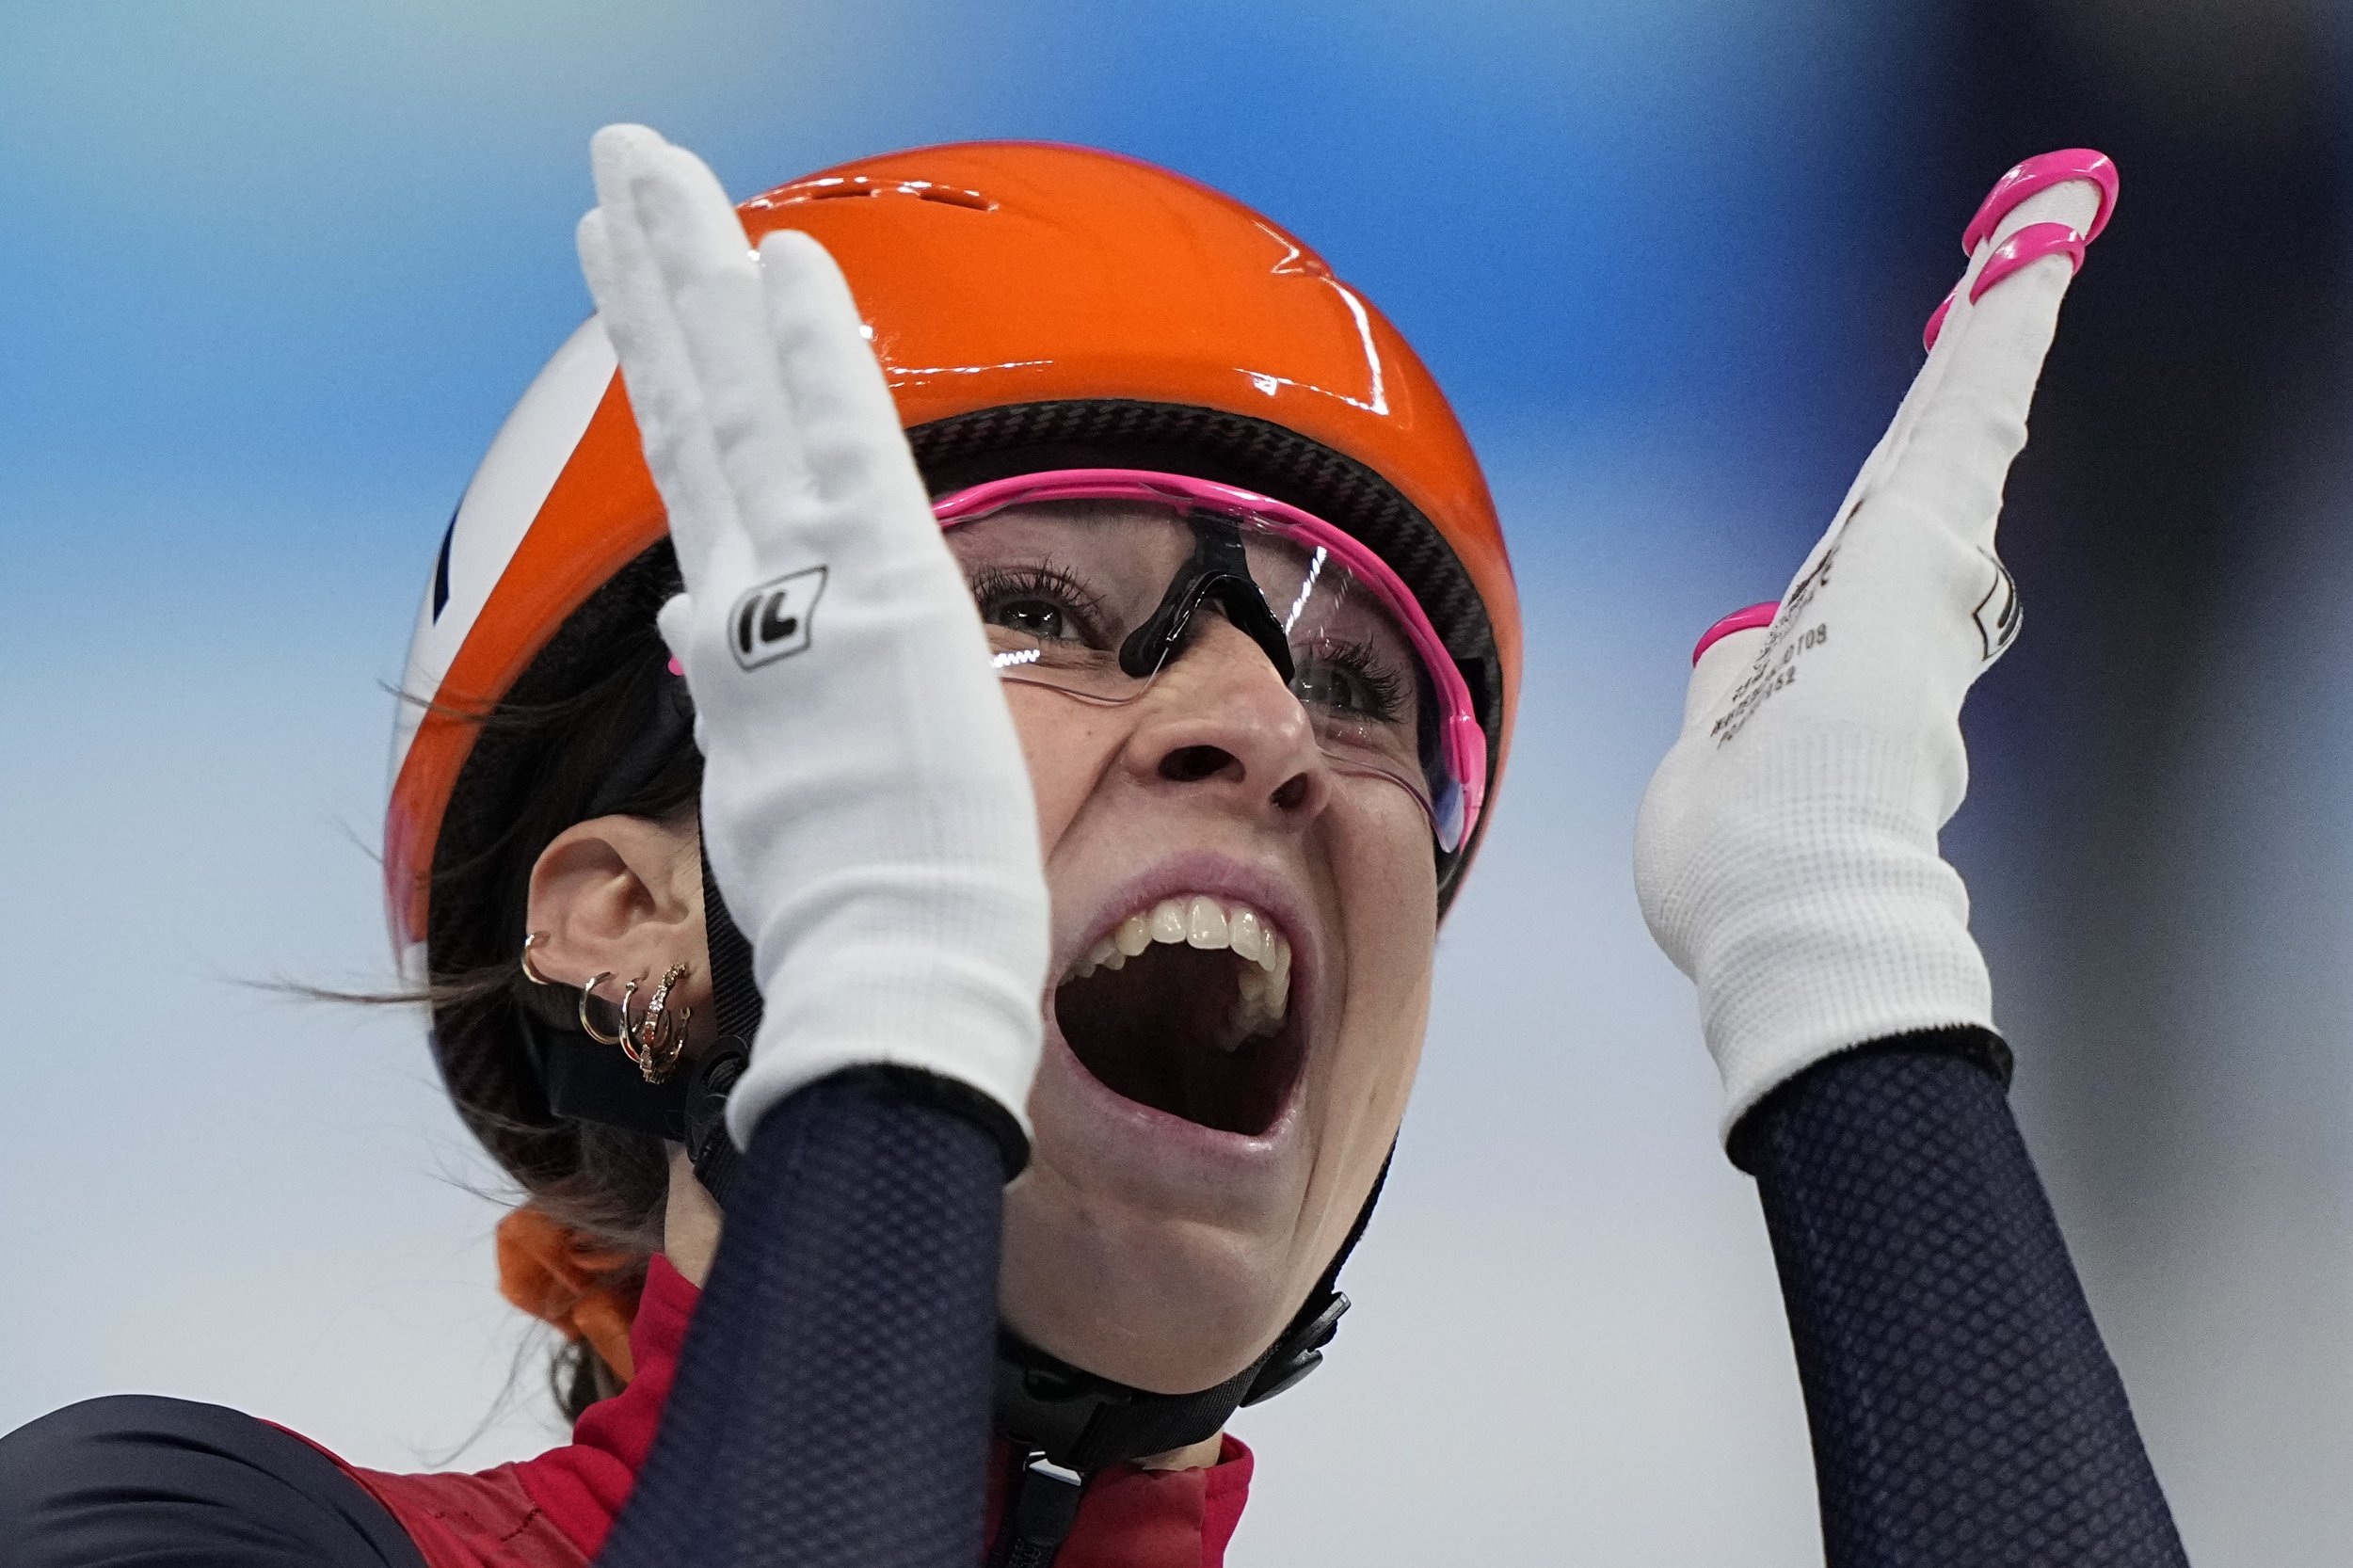  Suzanne Schulting of the Netherlands, reacts after winning the final of the women's 1000-meters during the short track speedskating competition at the 2022 Winter Olympics, Friday, Feb. 11, 2022, in Beijing. (AP Photo/David J. Phillip) 